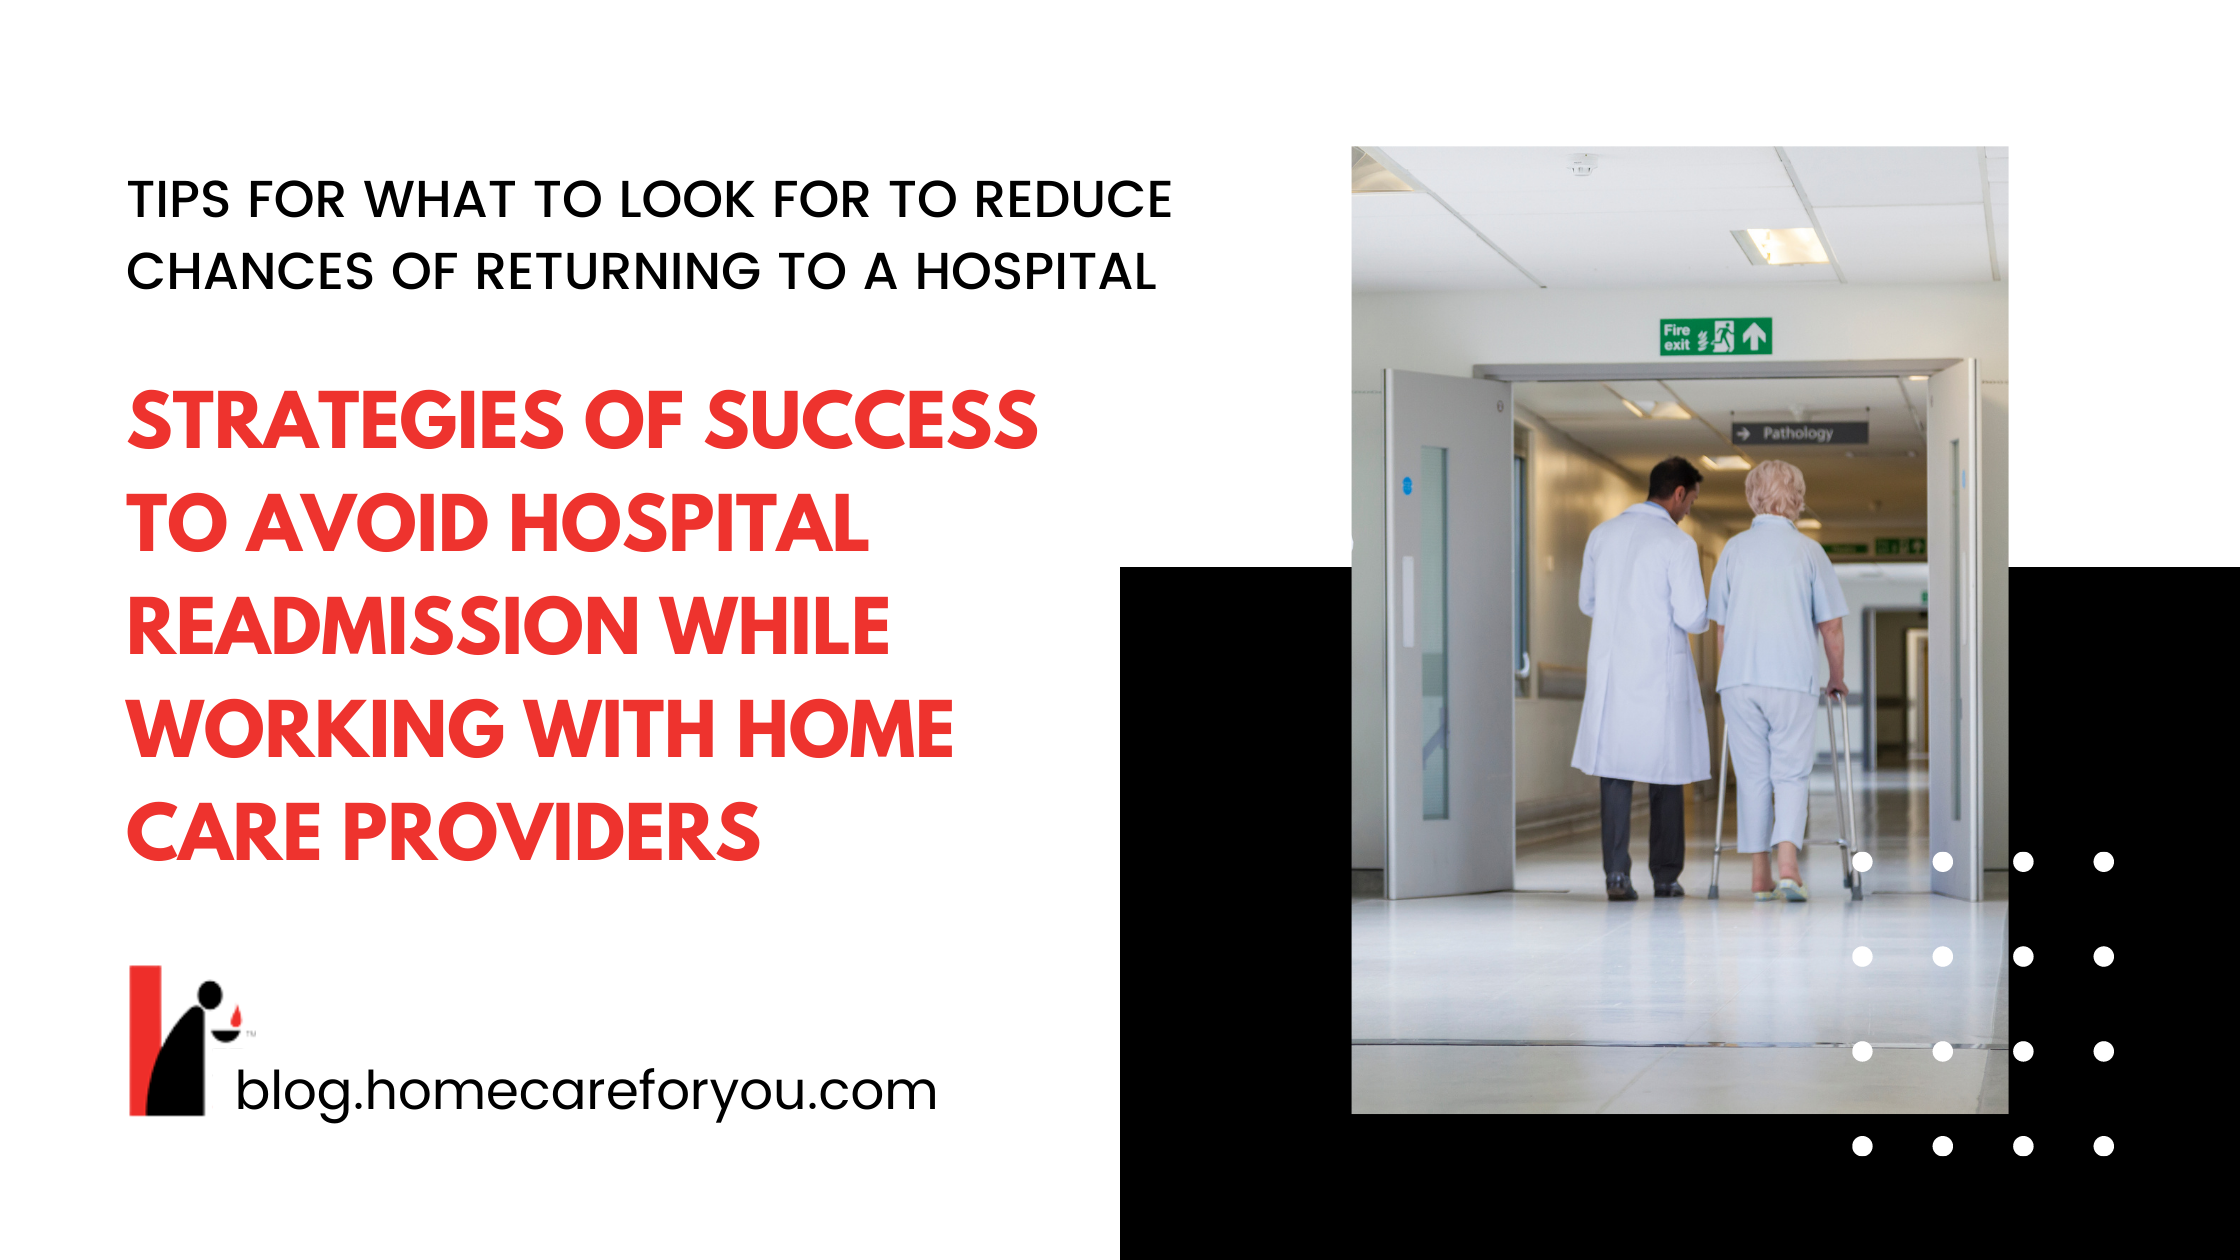 Strategies of Success To Avoid Hospital Readmission While Working With Home Care Providers